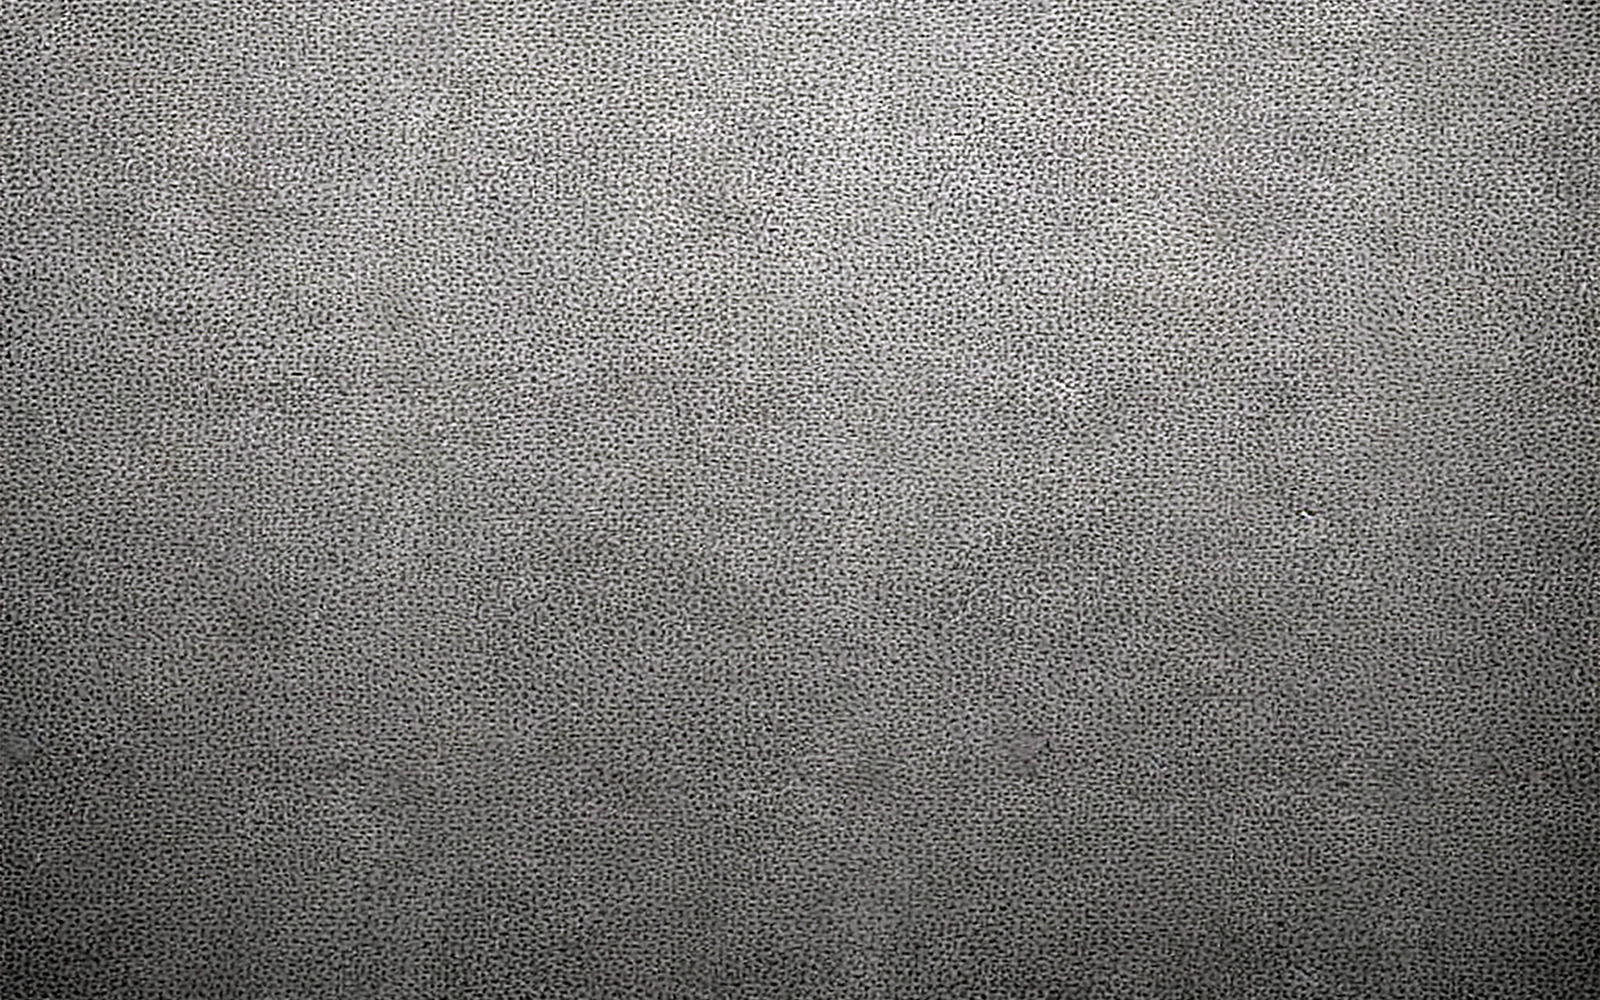 Textured wall background_old textured wall pattern background_texture wall background